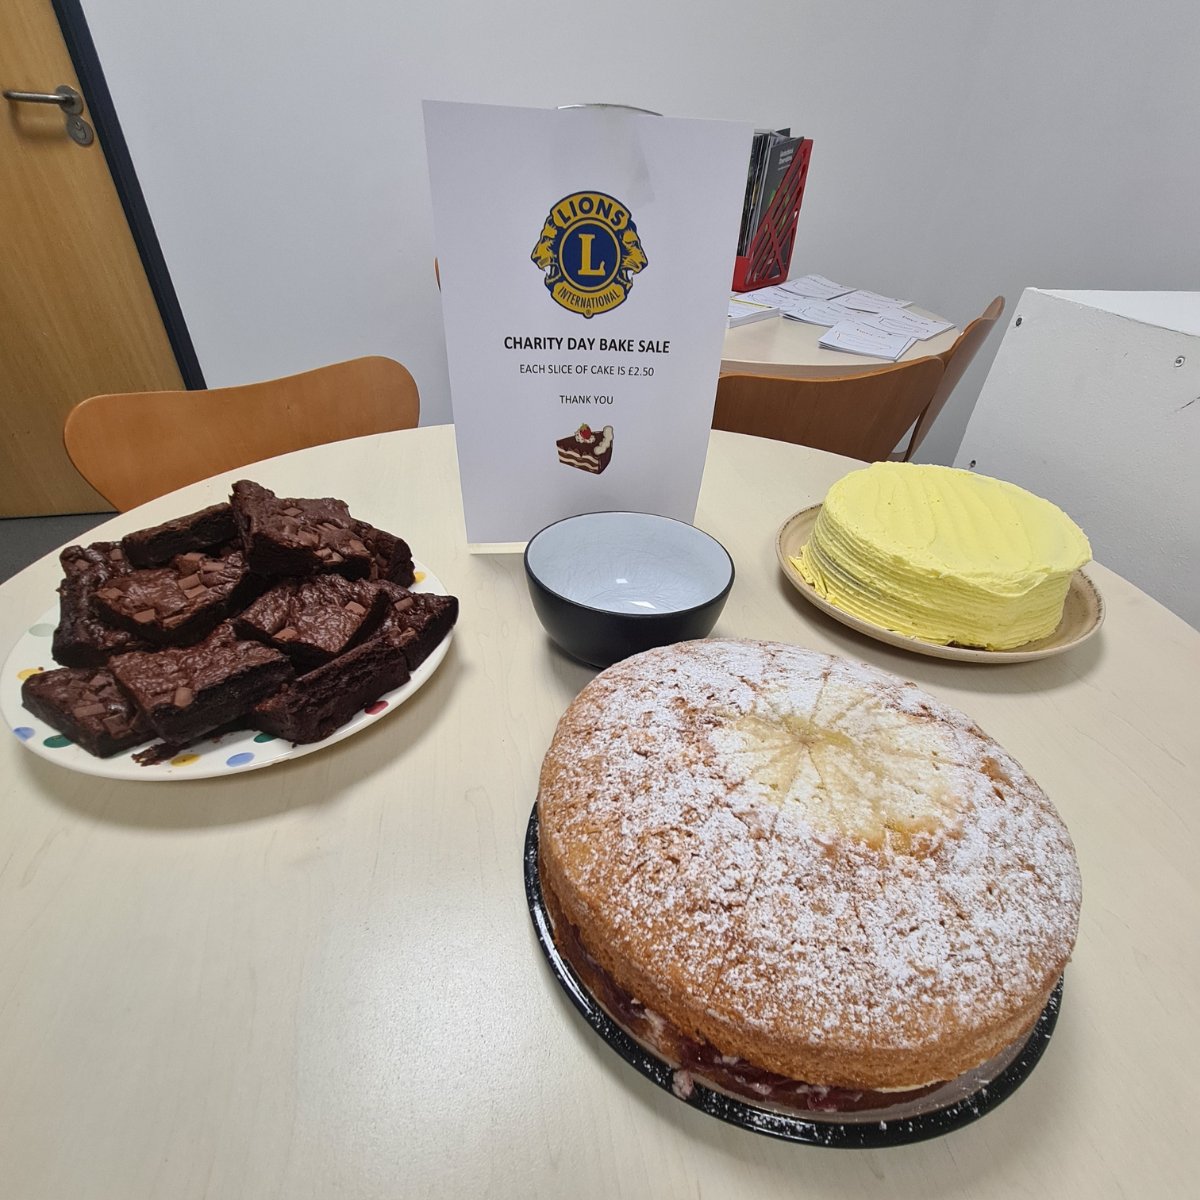 Well done to all the RBL team for raising over £1,500 for the Lions Club International.

What did the team do to raise this money?
🍔 BBQ held at RBL headquarters
🍰 Cake sales
🎁 Raffle - an extra day of annual leave was up for grabs!!!
🎲 Games

#CharityDay #Construction